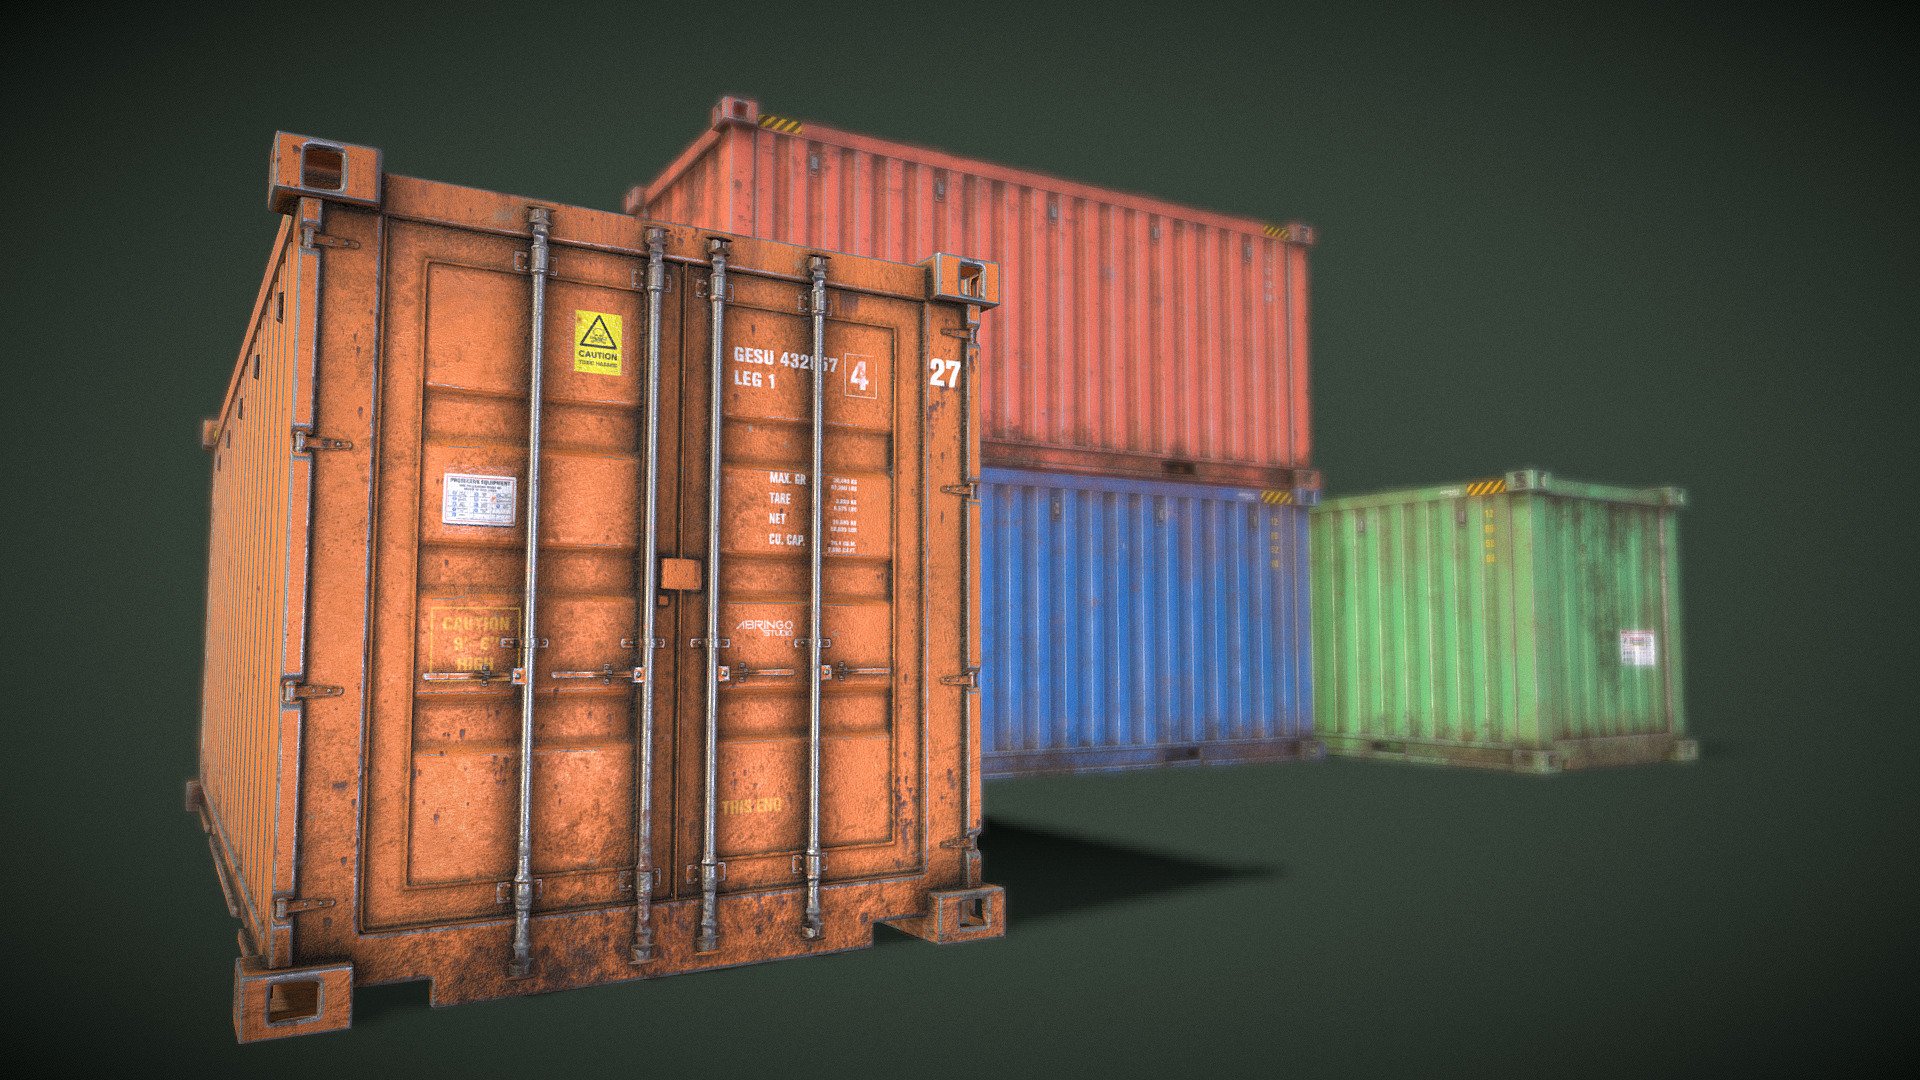 Game ready Shipping Cargo Container 3D model
Software used: Blender + Substance Painter - Shiping container - Download Free 3D model by Abringo 3d model